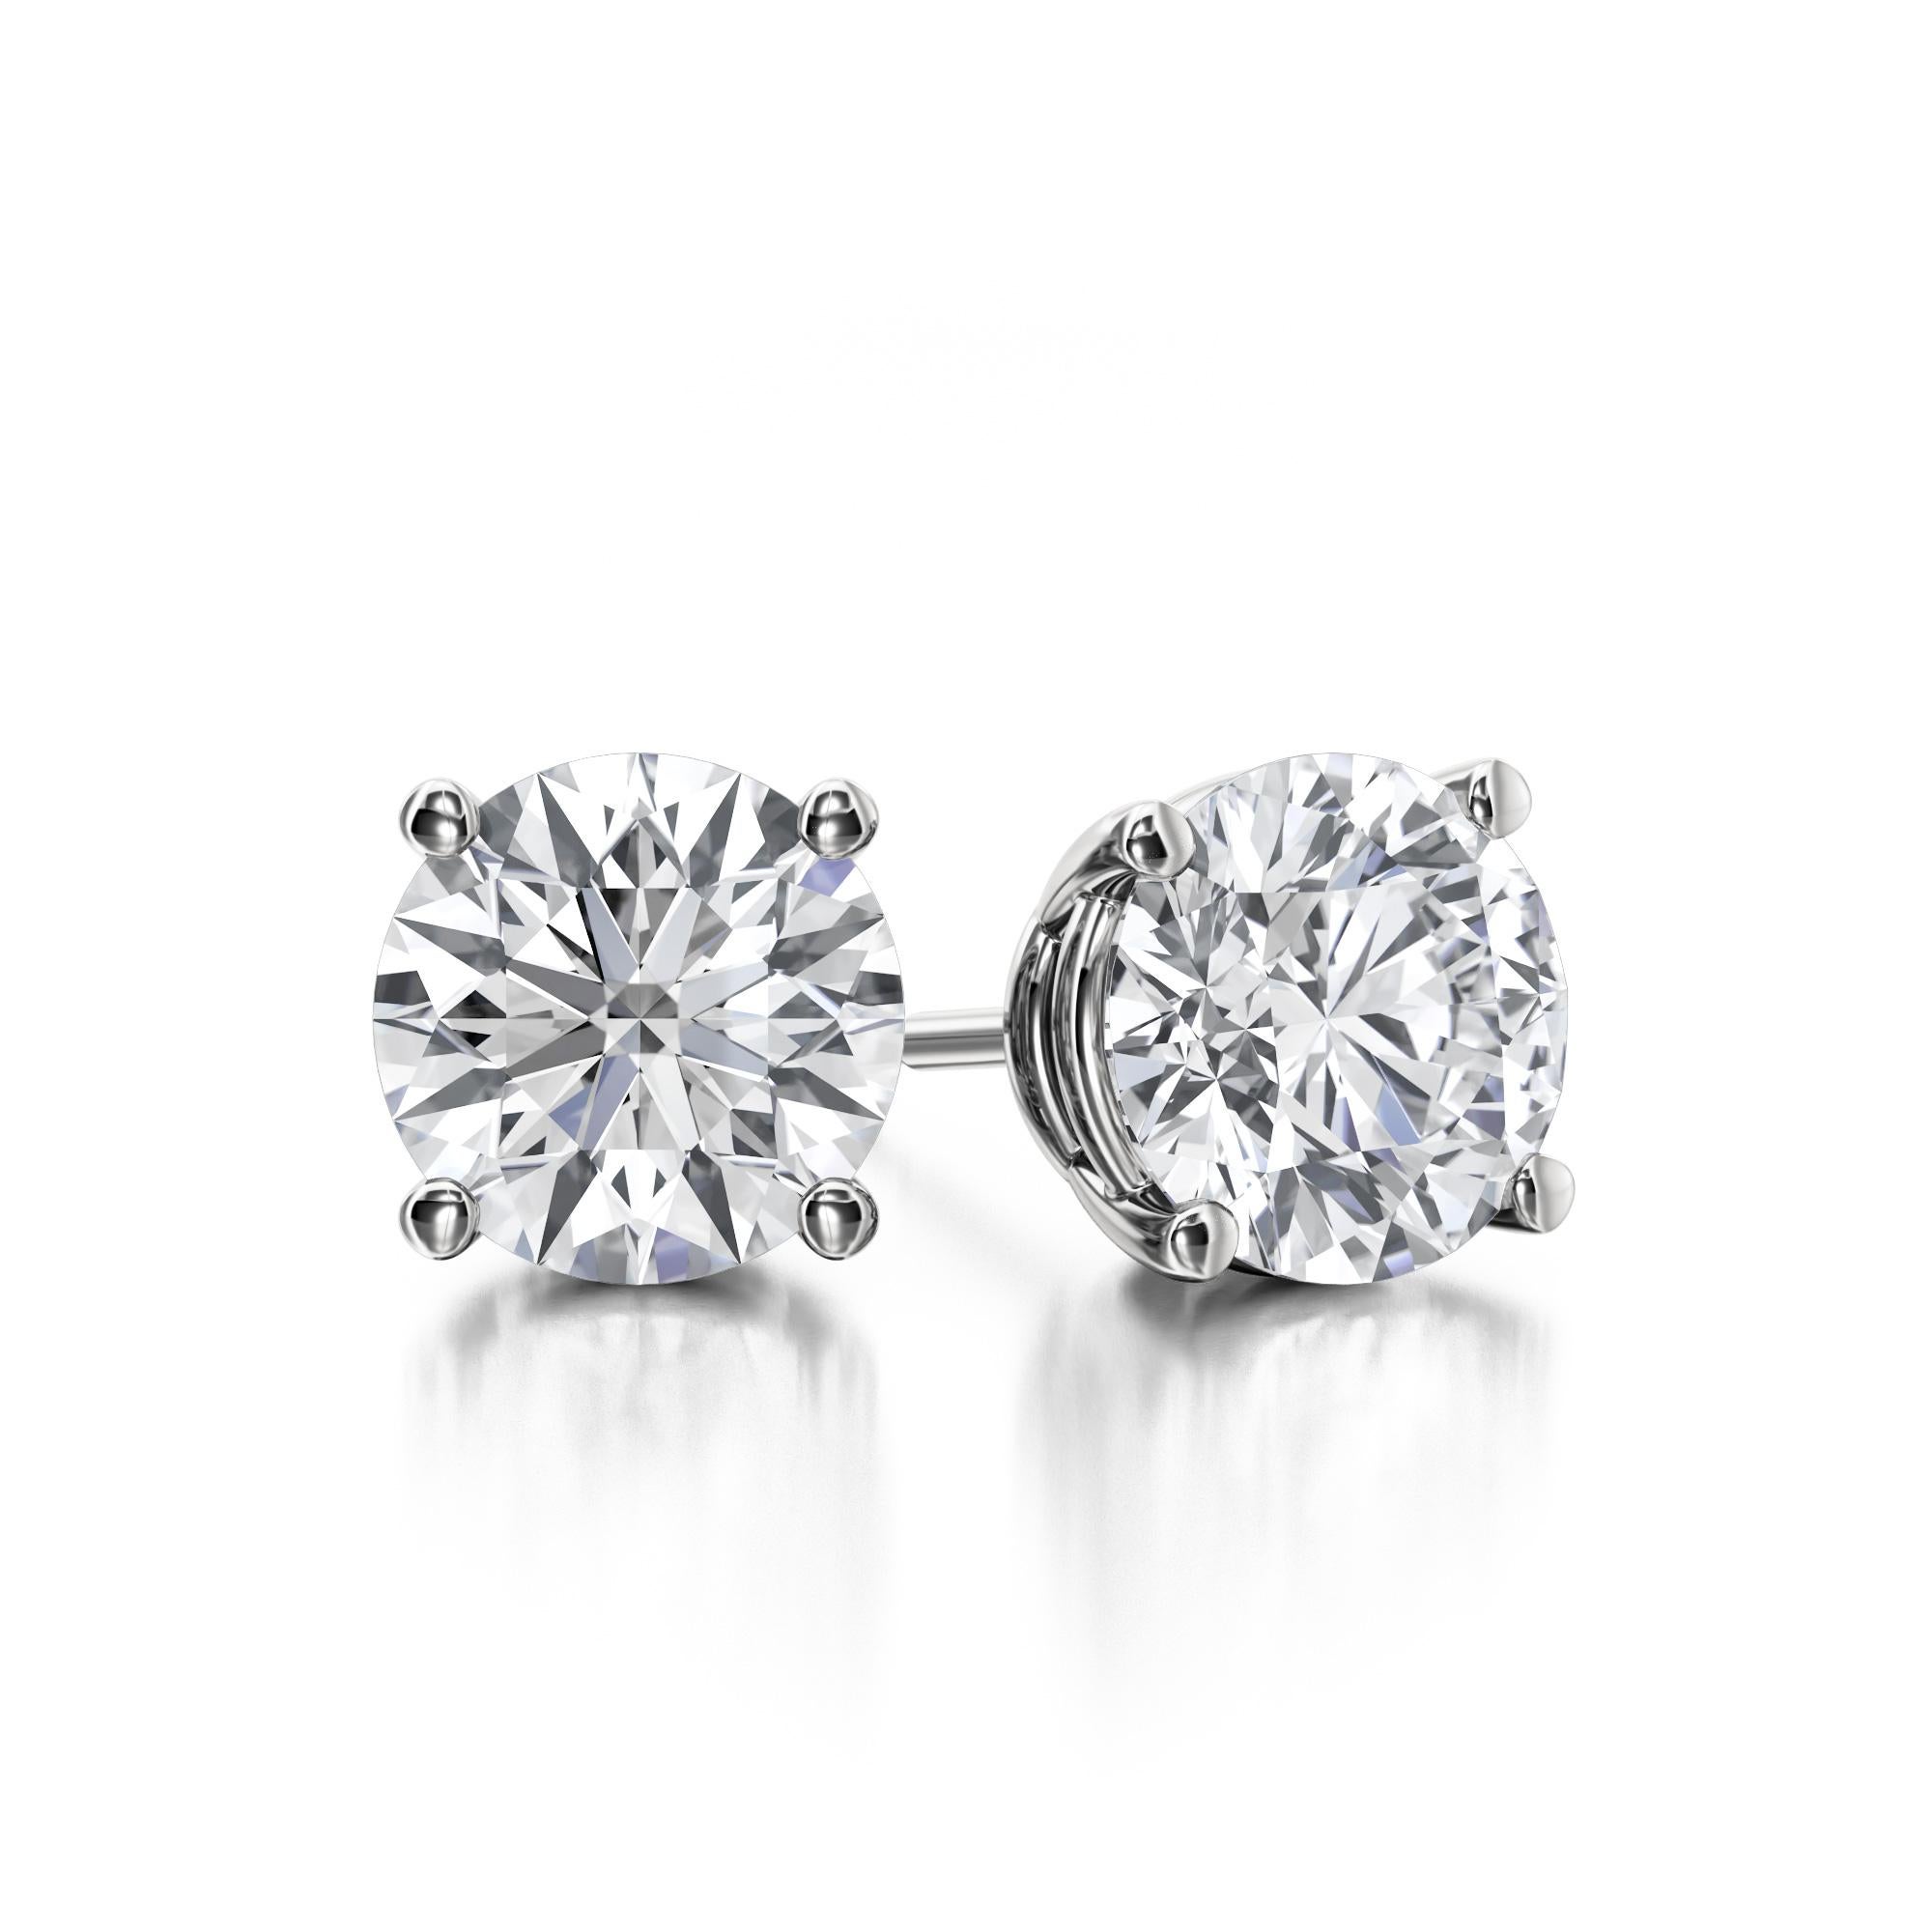 Classic Four Prong Diamond Stud Earrings, featuring:
✧ 2 earth mined diamonds H color SI1-SI2 weighing 1.50 carats+
✧ Measurements: 5.75mm*5.75mm
✧ Available in 18K White Gold
✧ Push back friction closure
✧ Free appraisal included with your